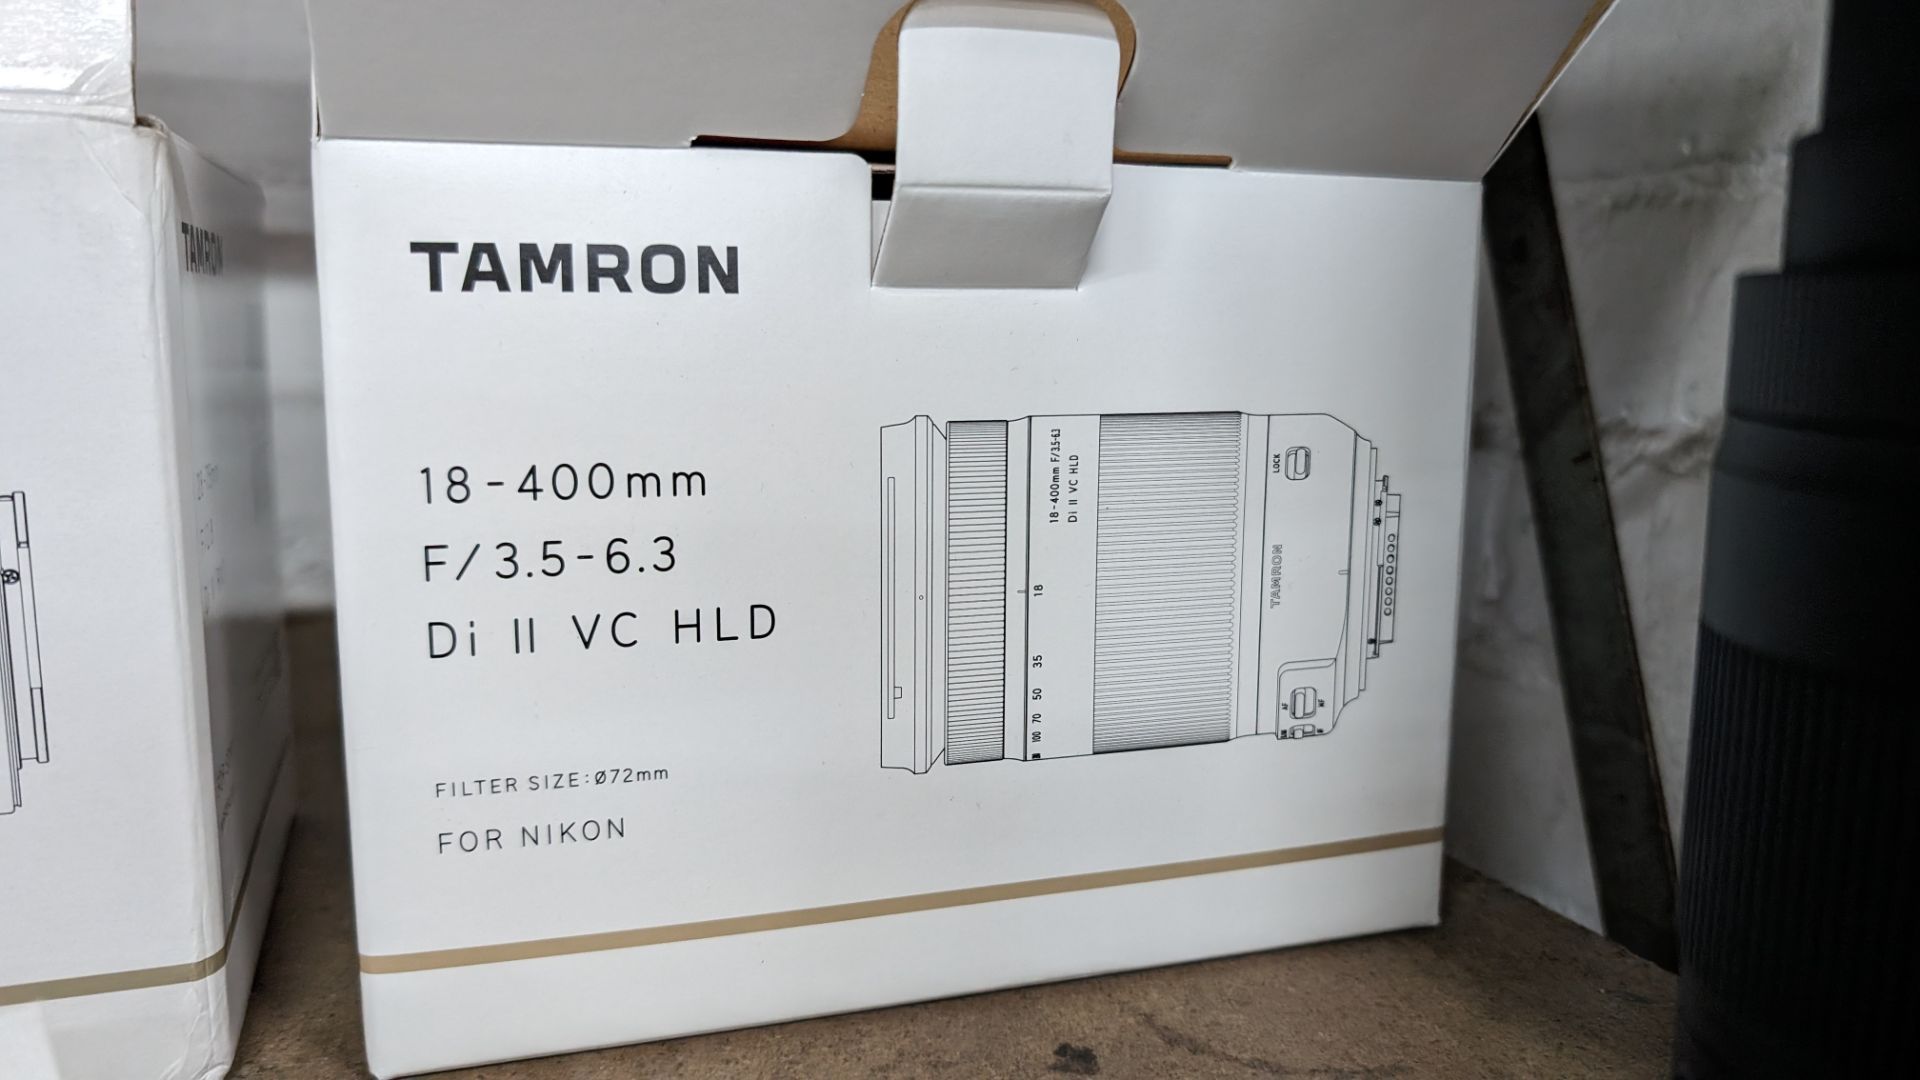 Tamron 18-400mm lens, f/3.5-6.3, Di II VC HLD. Filter size 72mm. For Nikon - Image 4 of 7